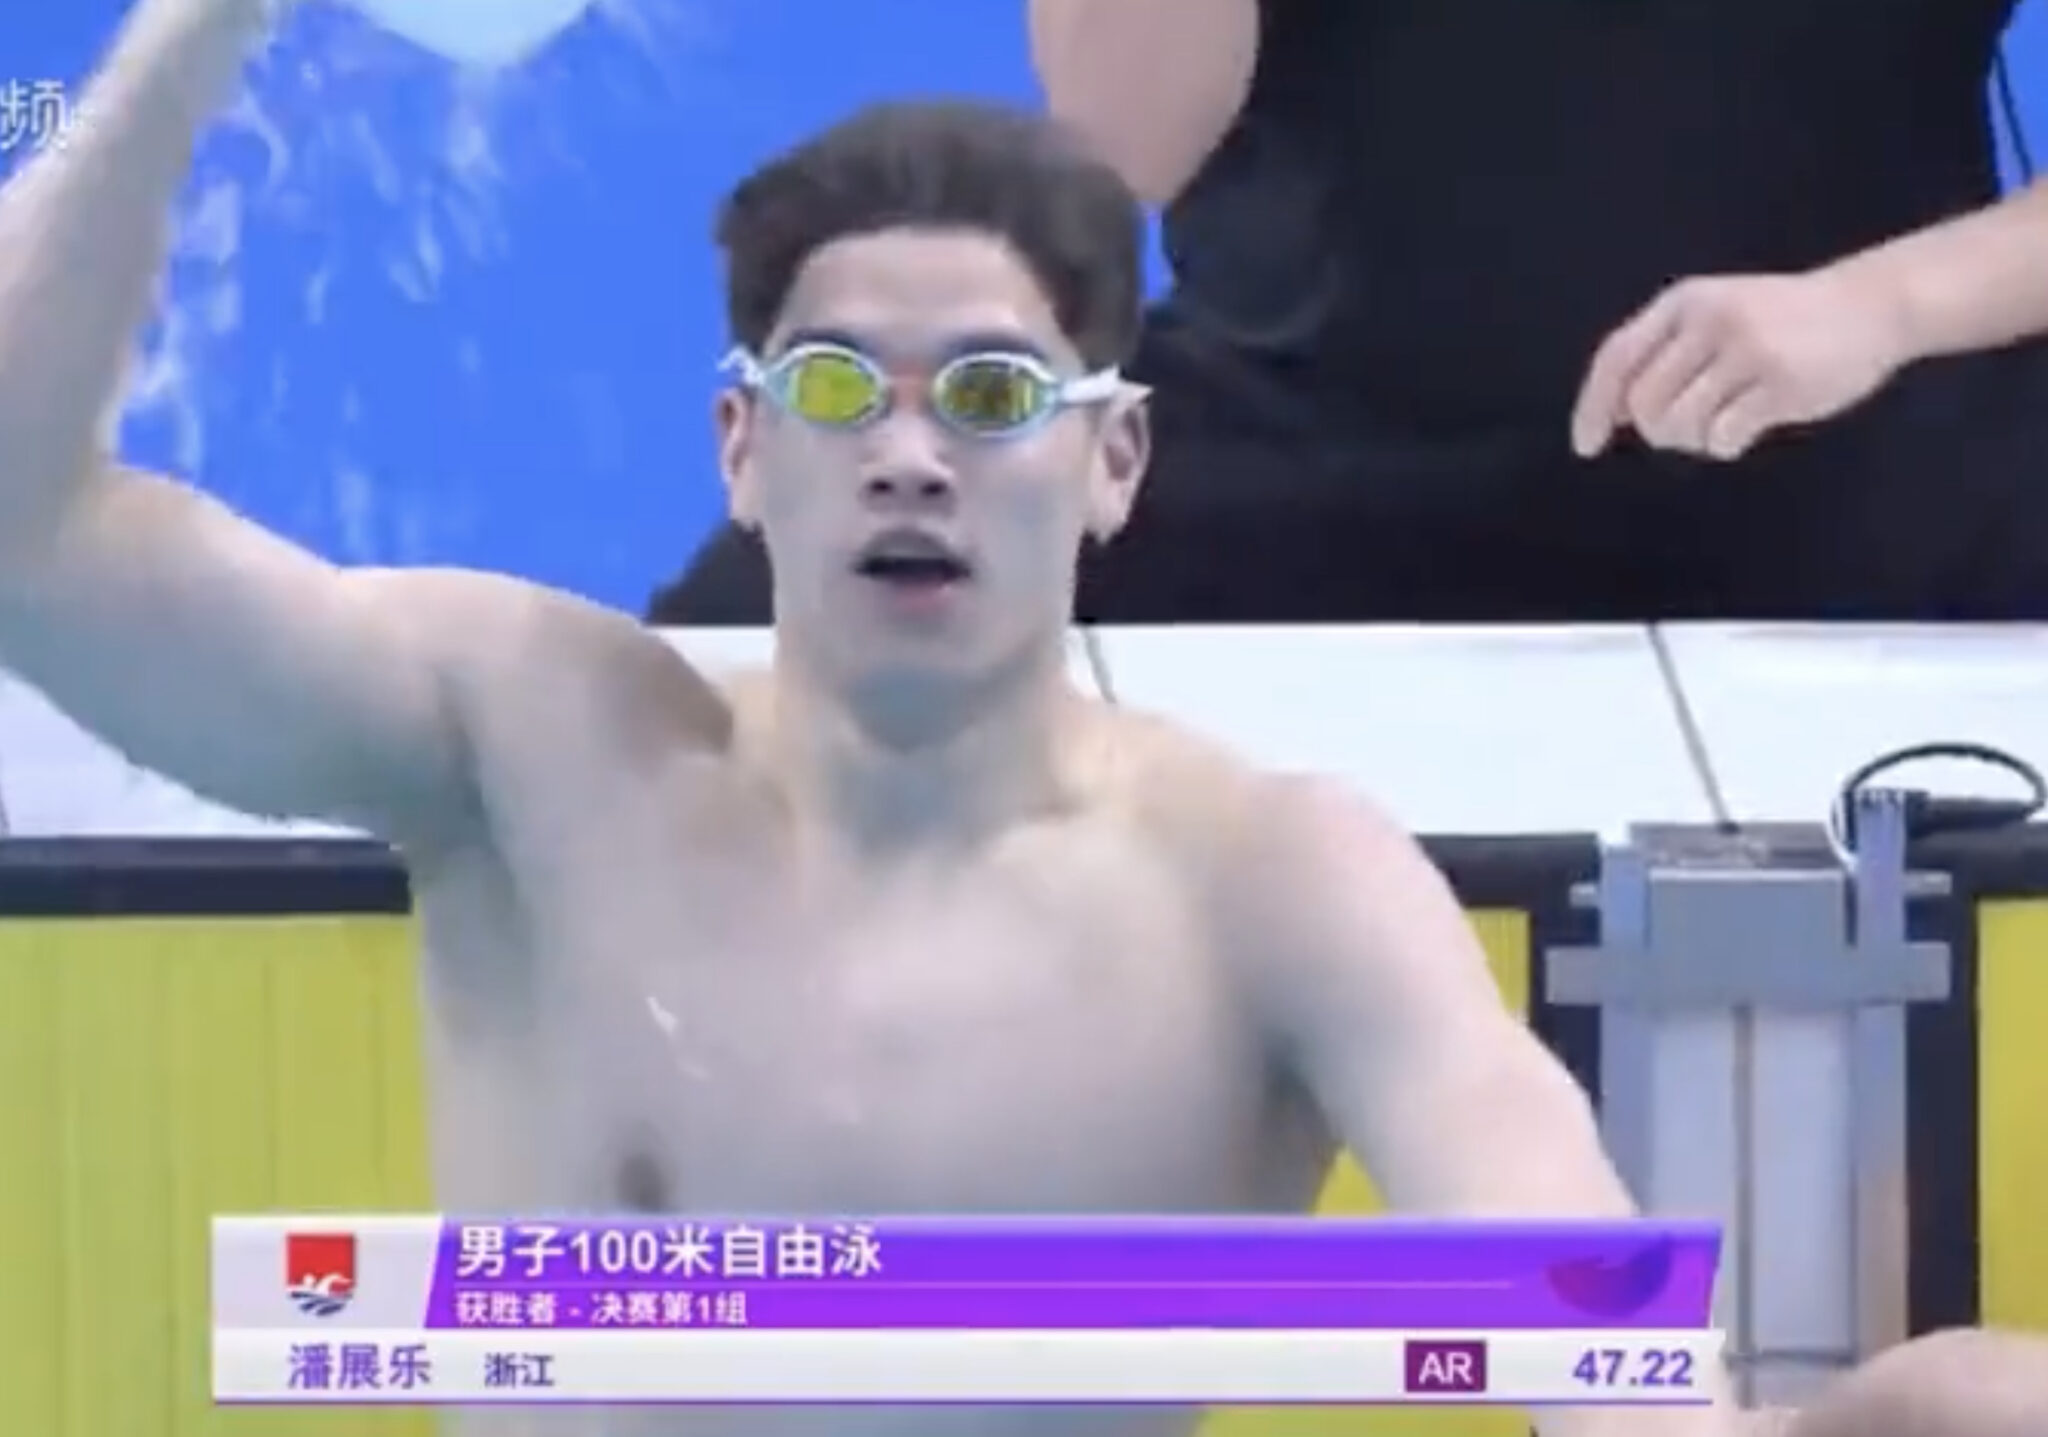 Xxx16 Video - 18-Yr-Old Pan Zhanle Blasts 47.22 100 Free Asian Record (Video)